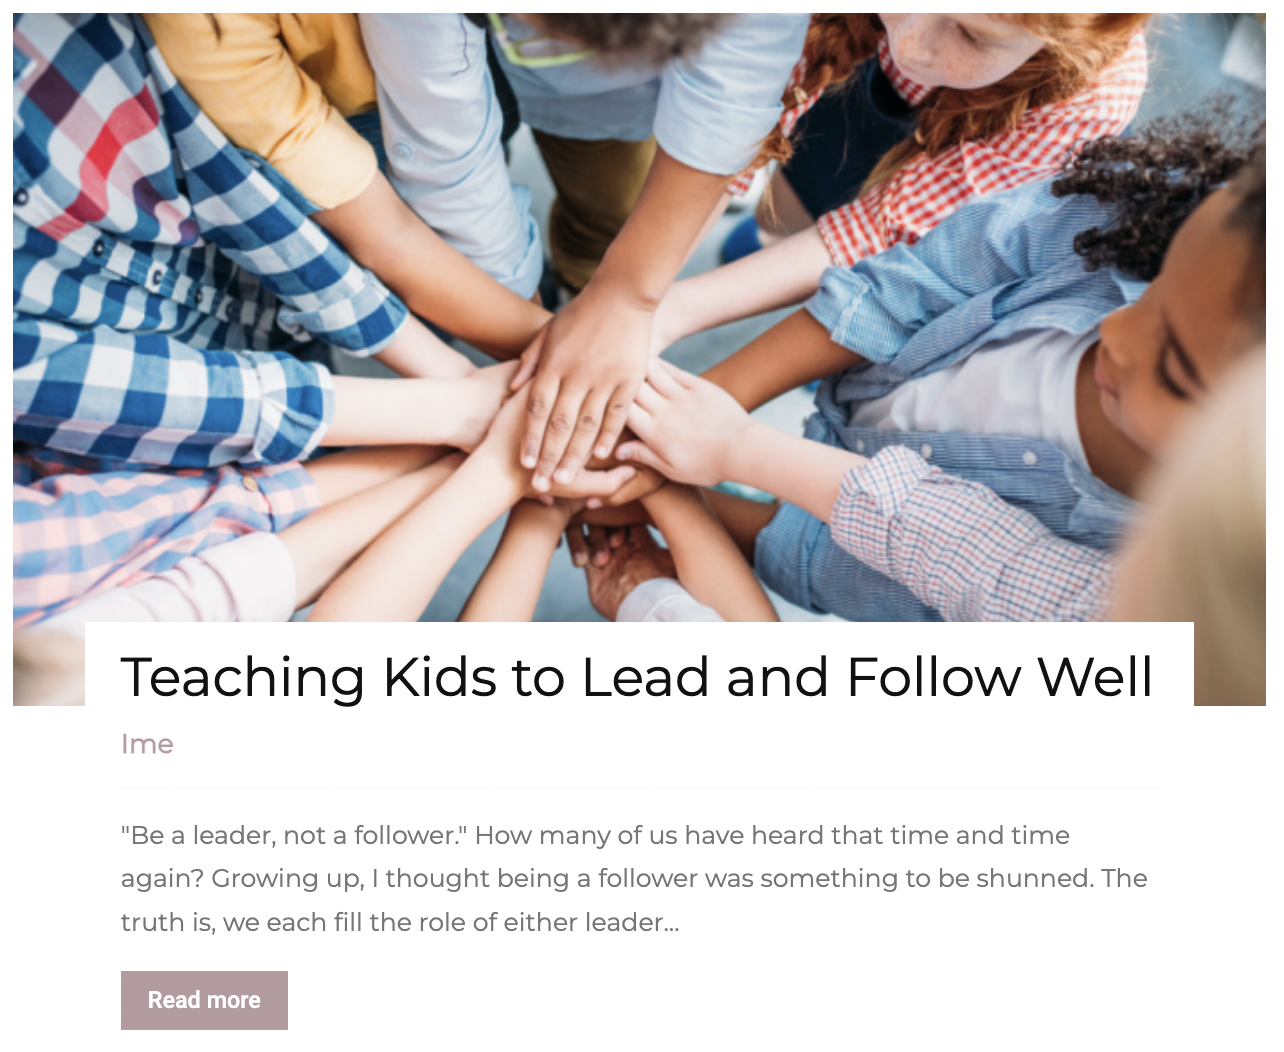 Lead and Follow Well Article